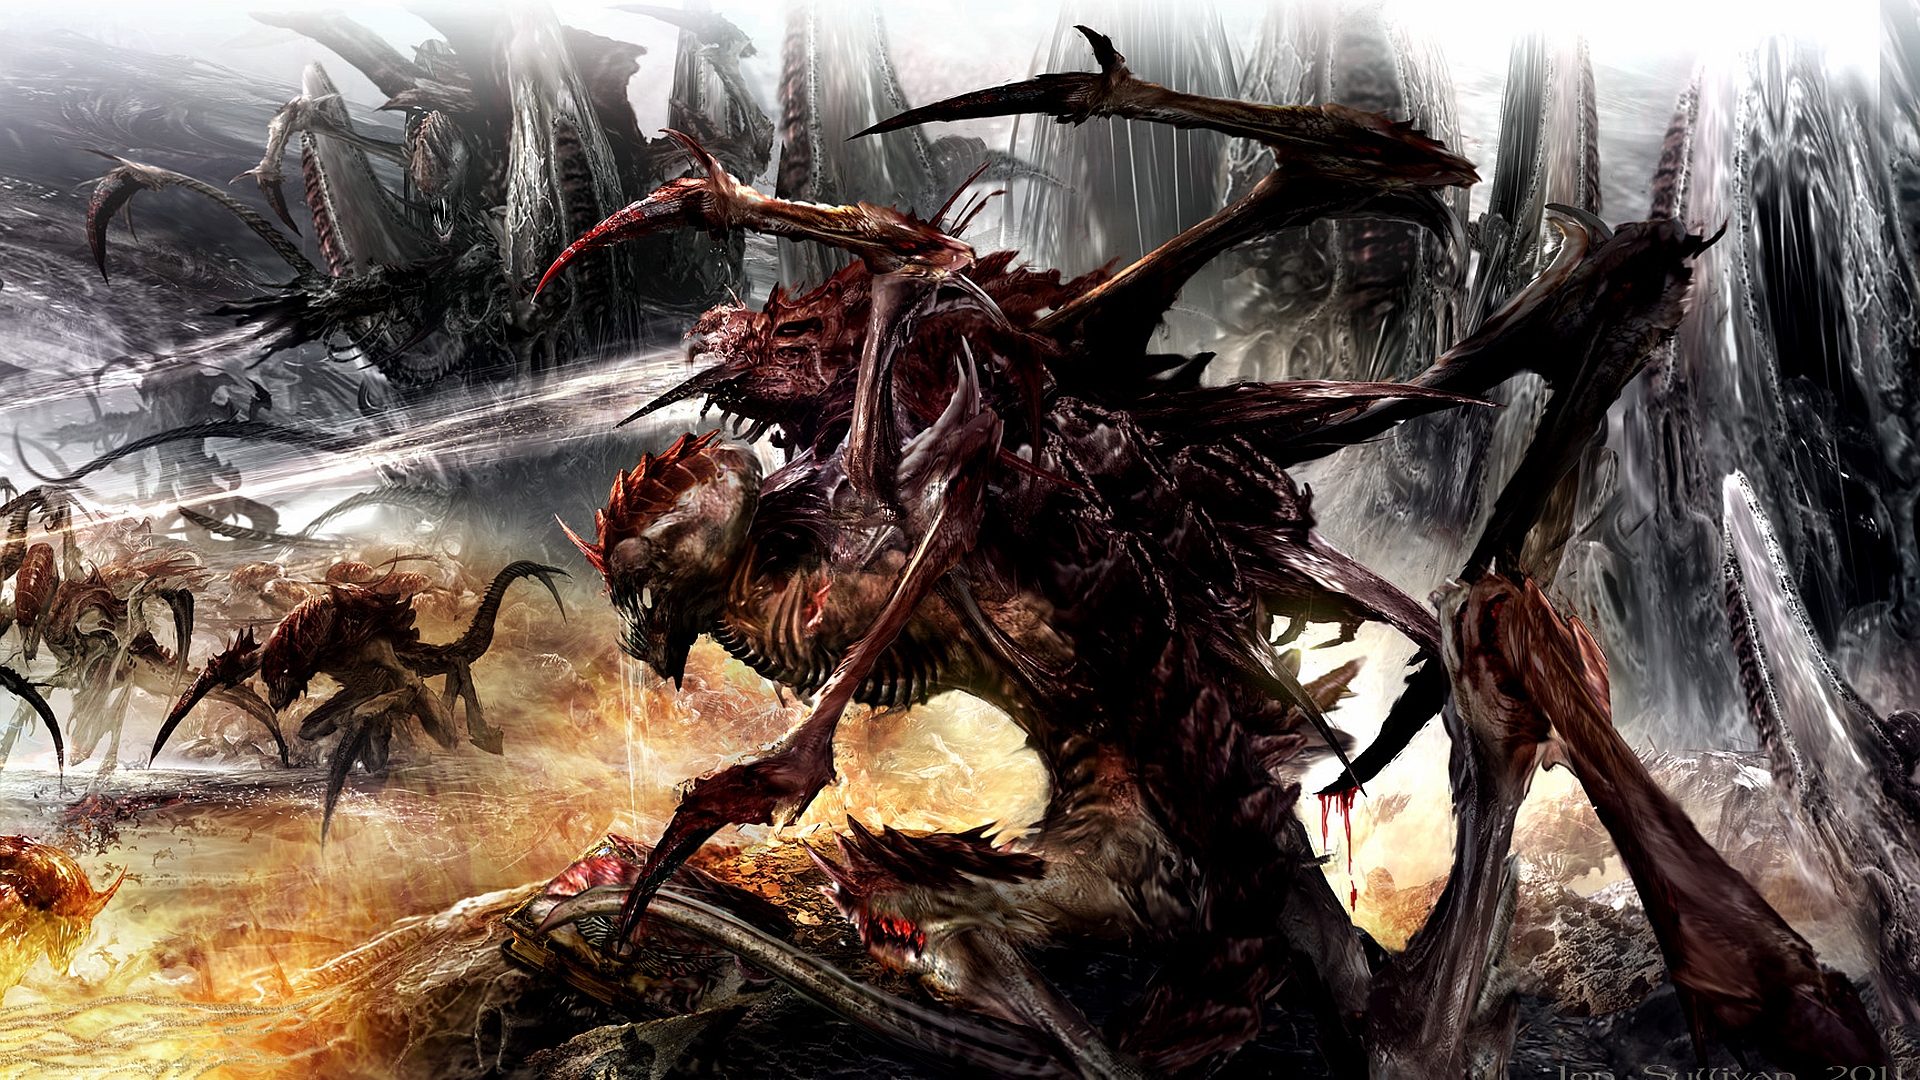 4 Tyranids (Warhammer) HD Wallpapers | Backgrounds - Wallpaper Abyss